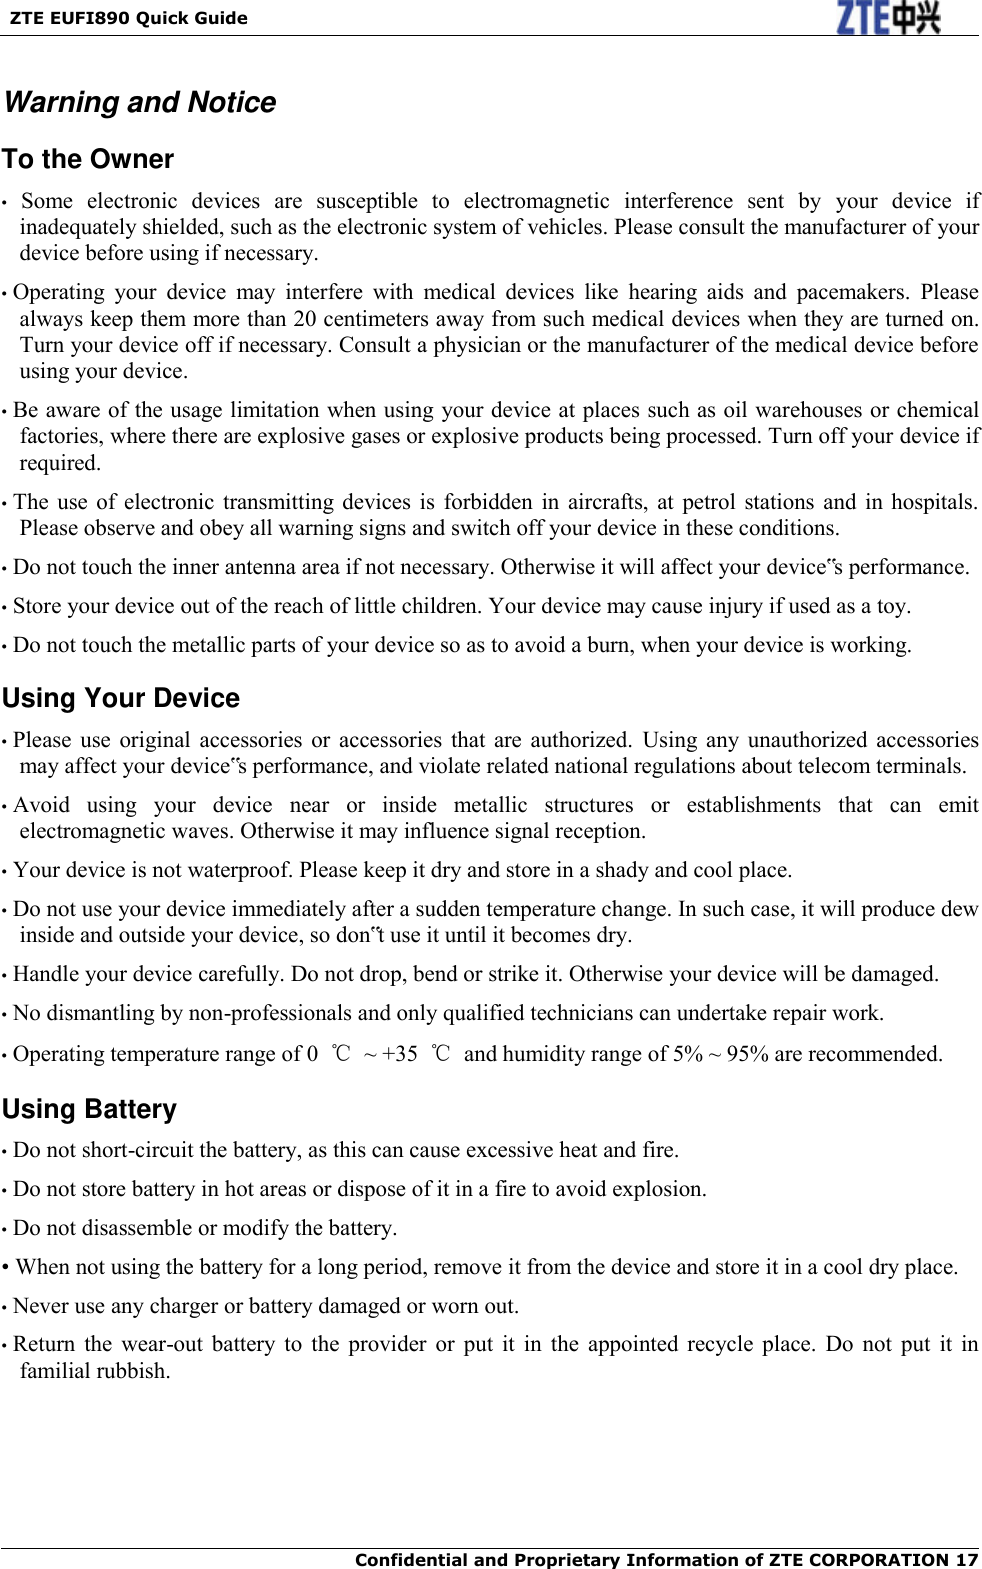   ZTE EUFI890 Quick Guide  Confidential and Proprietary Information of ZTE CORPORATION 17   Warning and Notice To the Owner •  Some  electronic  devices  are  susceptible  to  electromagnetic  interference  sent  by  your  device  if inadequately shielded, such as the electronic system of vehicles. Please consult the manufacturer of your device before using if necessary. • Operating  your  device  may  interfere  with  medical  devices  like  hearing  aids  and  pacemakers.  Please always keep them more than 20 centimeters away from such medical devices when they are turned on. Turn your device off if necessary. Consult a physician or the manufacturer of the medical device before using your device. • Be aware of the usage limitation when using your device at places such as oil warehouses or chemical factories, where there are explosive gases or explosive products being processed. Turn off your device if required. • The  use  of  electronic  transmitting  devices  is forbidden  in  aircrafts,  at  petrol  stations  and  in  hospitals. Please observe and obey all warning signs and switch off your device in these conditions. • Do not touch the inner antenna area if not necessary. Otherwise it will affect your device‟s performance. • Store your device out of the reach of little children. Your device may cause injury if used as a toy. • Do not touch the metallic parts of your device so as to avoid a burn, when your device is working. Using Your Device • Please  use  original  accessories  or  accessories  that  are  authorized.  Using  any  unauthorized  accessories may affect your device‟s performance, and violate related national regulations about telecom terminals. • Avoid  using  your  device  near  or  inside  metallic  structures  or  establishments  that  can  emit electromagnetic waves. Otherwise it may influence signal reception. • Your device is not waterproof. Please keep it dry and store in a shady and cool place. • Do not use your device immediately after a sudden temperature change. In such case, it will produce dew inside and outside your device, so don‟t use it until it becomes dry. • Handle your device carefully. Do not drop, bend or strike it. Otherwise your device will be damaged. • No dismantling by non-professionals and only qualified technicians can undertake repair work. • Operating temperature range of 0  ℃  ~ +35  ℃  and humidity range of 5% ~ 95% are recommended. Using Battery • Do not short-circuit the battery, as this can cause excessive heat and fire. • Do not store battery in hot areas or dispose of it in a fire to avoid explosion. • Do not disassemble or modify the battery. • When not using the battery for a long period, remove it from the device and store it in a cool dry place. • Never use any charger or battery damaged or worn out. • Return  the  wear-out  battery  to  the  provider  or  put  it  in  the  appointed  recycle  place.  Do  not  put  it  in familial rubbish. 